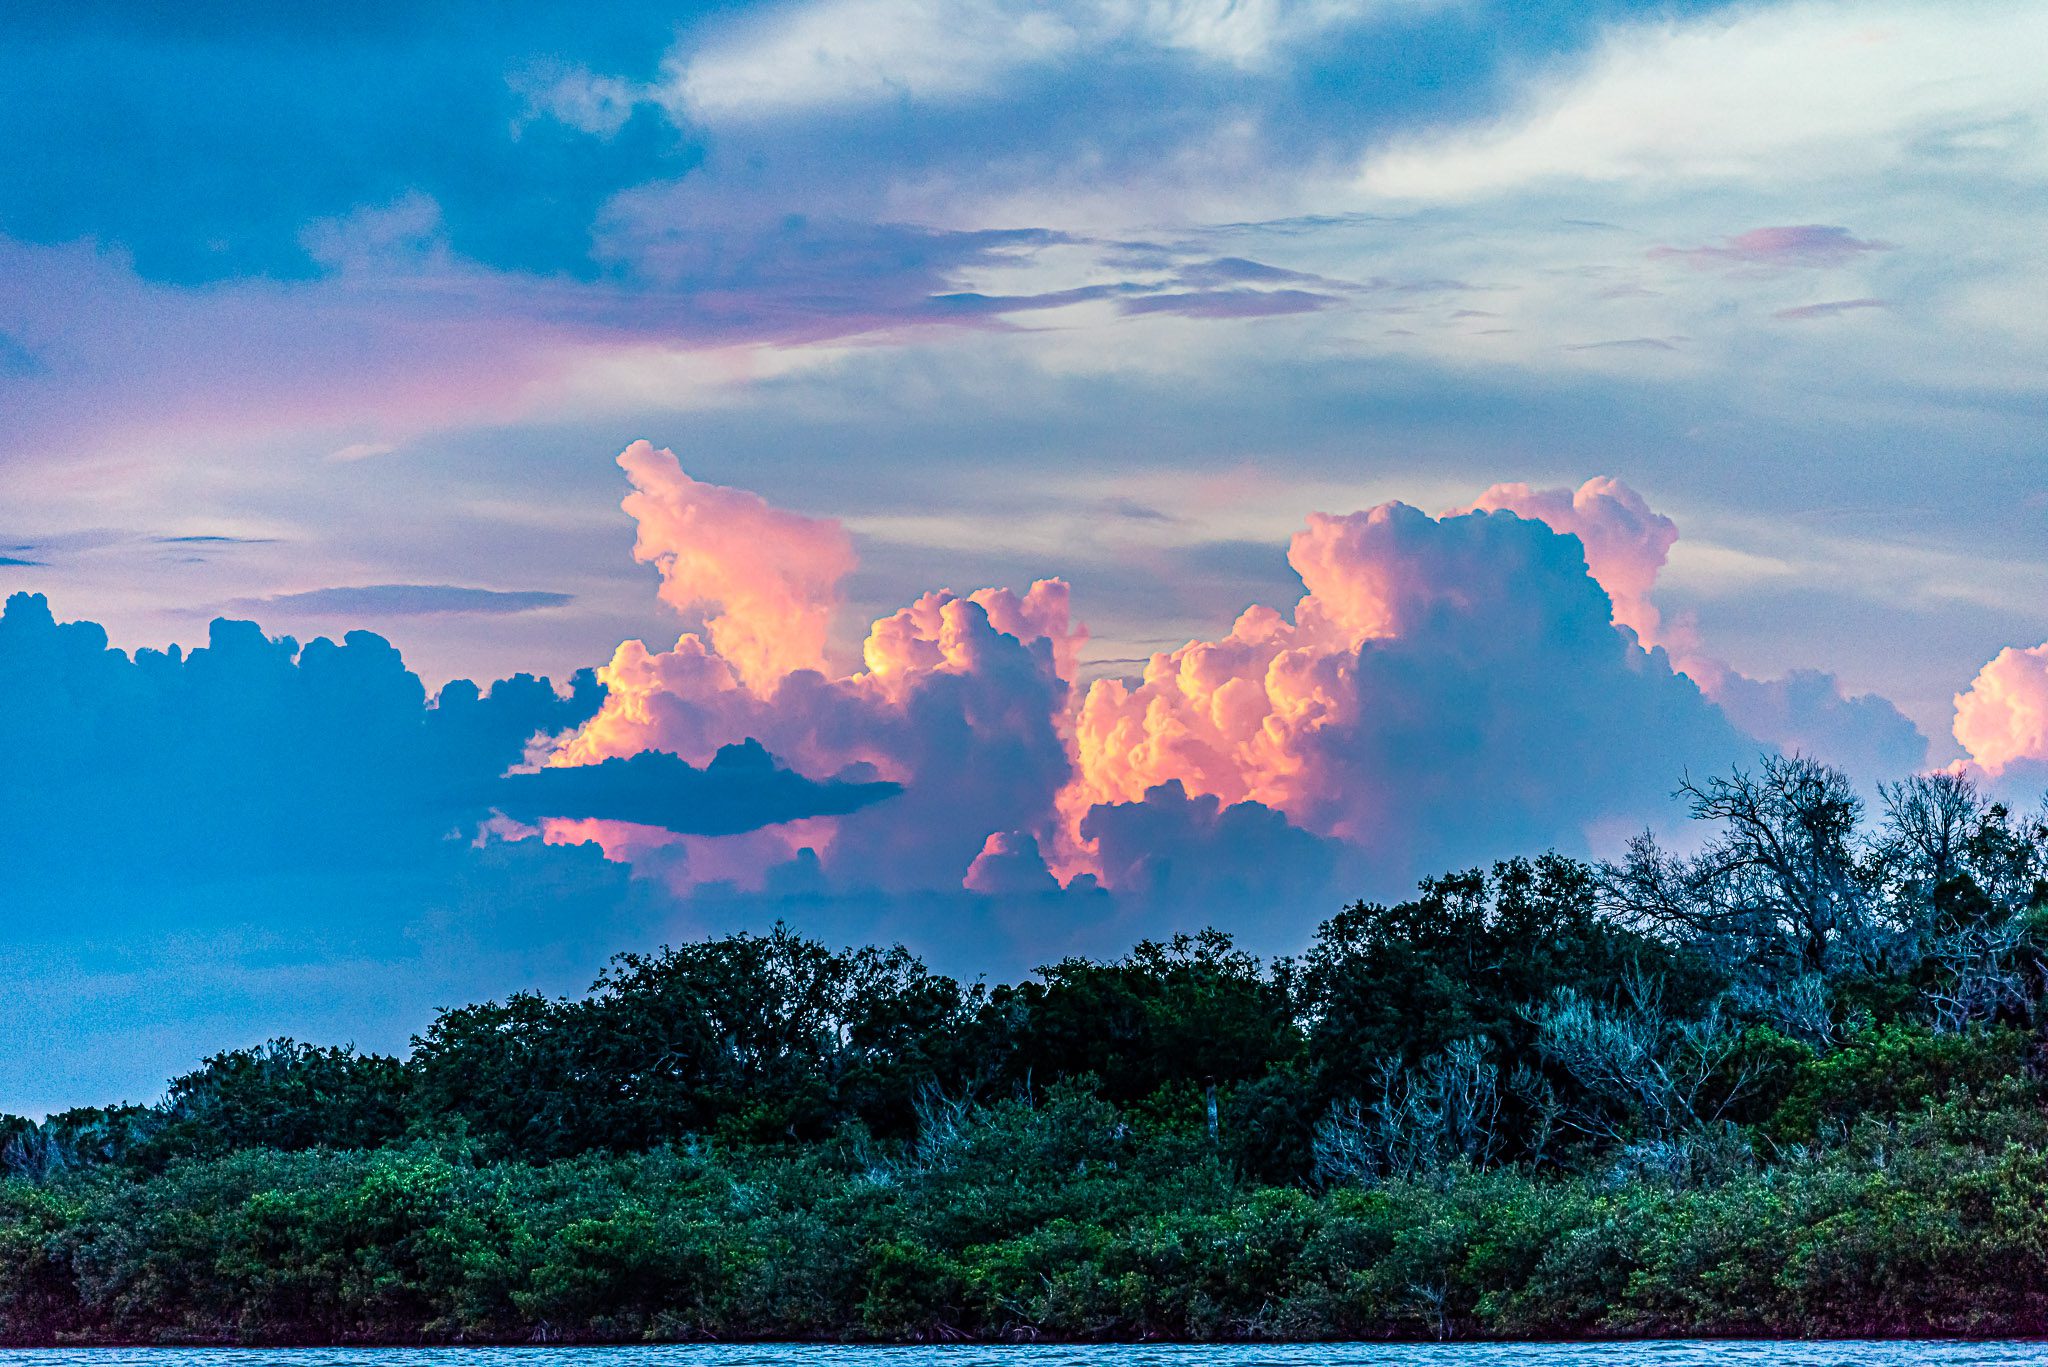 Pastel sunset over the mangrove islands and river along Canaveral National Seashore and the Indian River Lagoon.